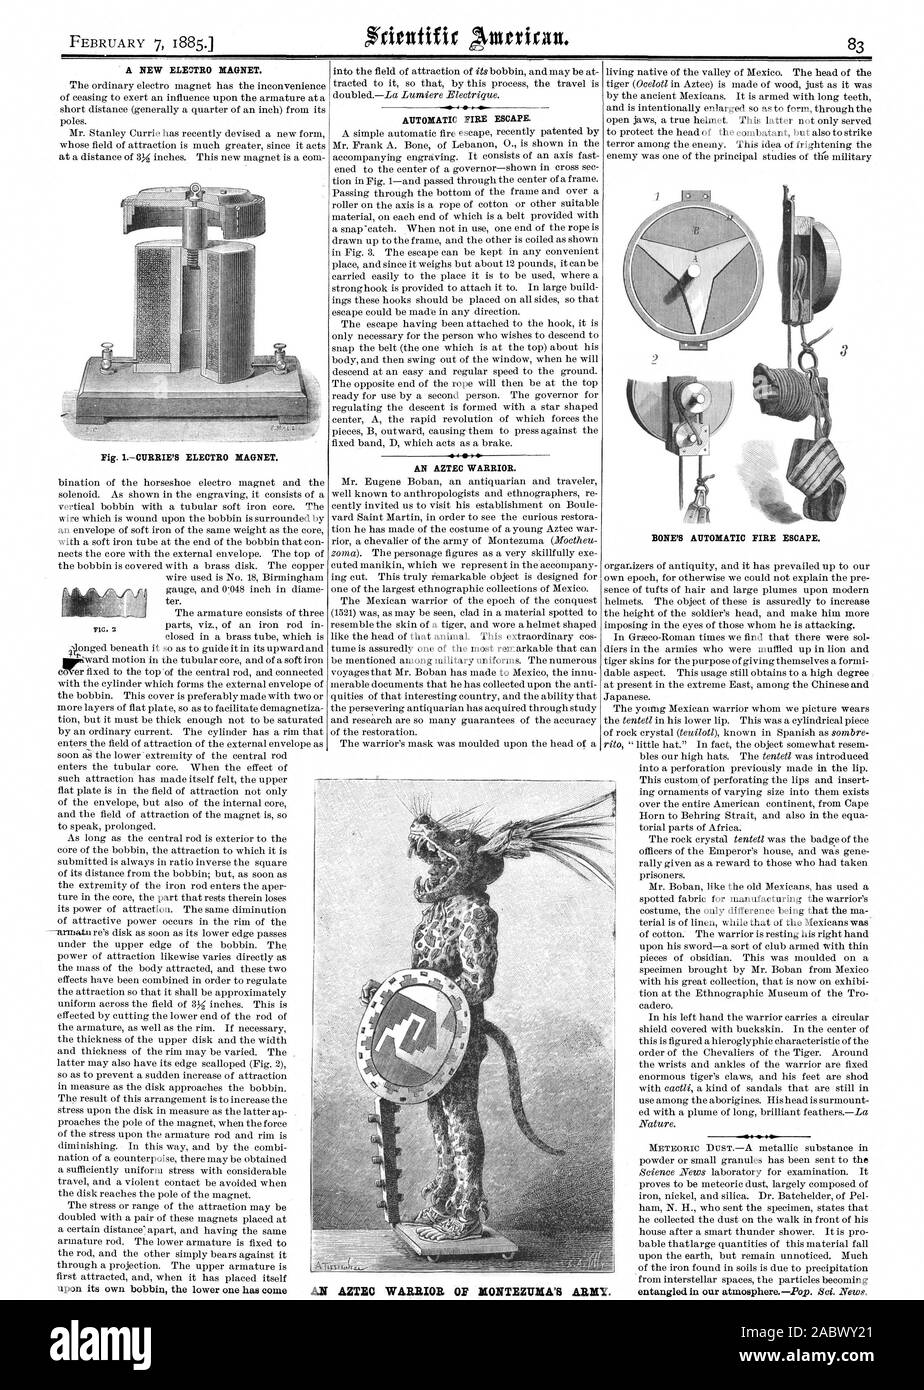 A NEW ELEUTRO MAGNET. CURRIE'S ELECTRO MAGNET. AUTOMATIC FIRE ESCAPE. AN AZTEC WARRIOR. BONE'S AUTOMATIC FIRE ESCAPE. AN AZTEC WARRIOR OF IIONTEZUBIA'S ARMY., scientific american, 1885-02-07 Stock Photo